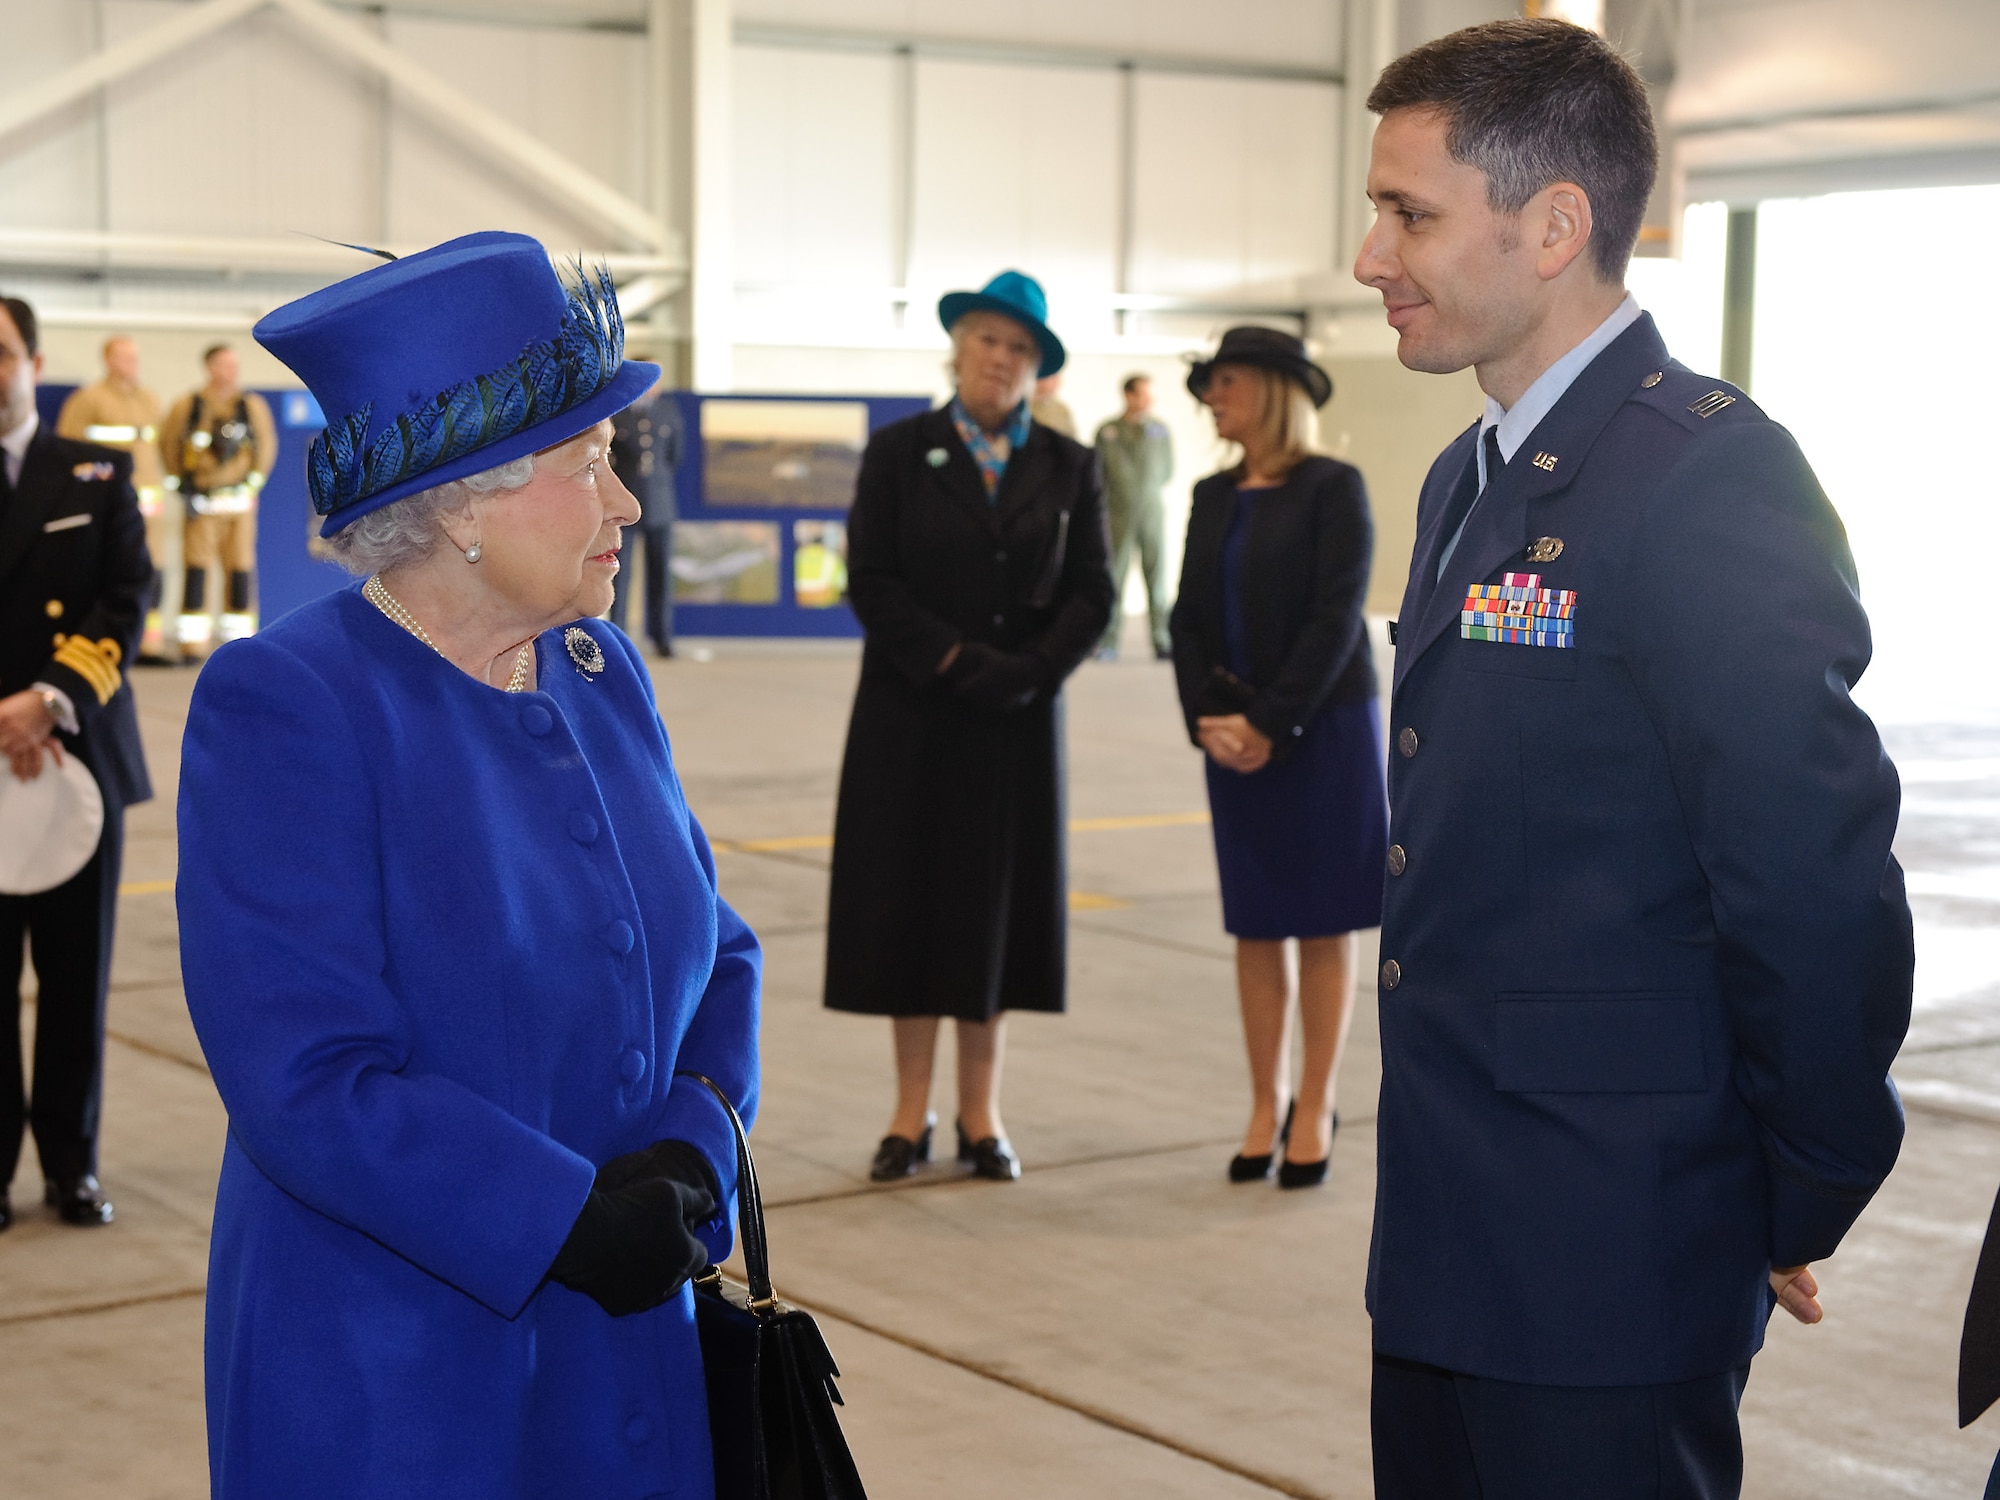 Her Majesty Queen Elizabeth II chats with Capt. Brusle Sherburne of the Air Force Intelligence, Surveillance and Reconnaissance Agency at Royal Air Force Marham, United Kingdom Feb. 3, 2014. Sherburne is the Air Force exchange officer with the Tactical Imagery-Intelligence Wing at Marham, UK. (Courtesy photo) 